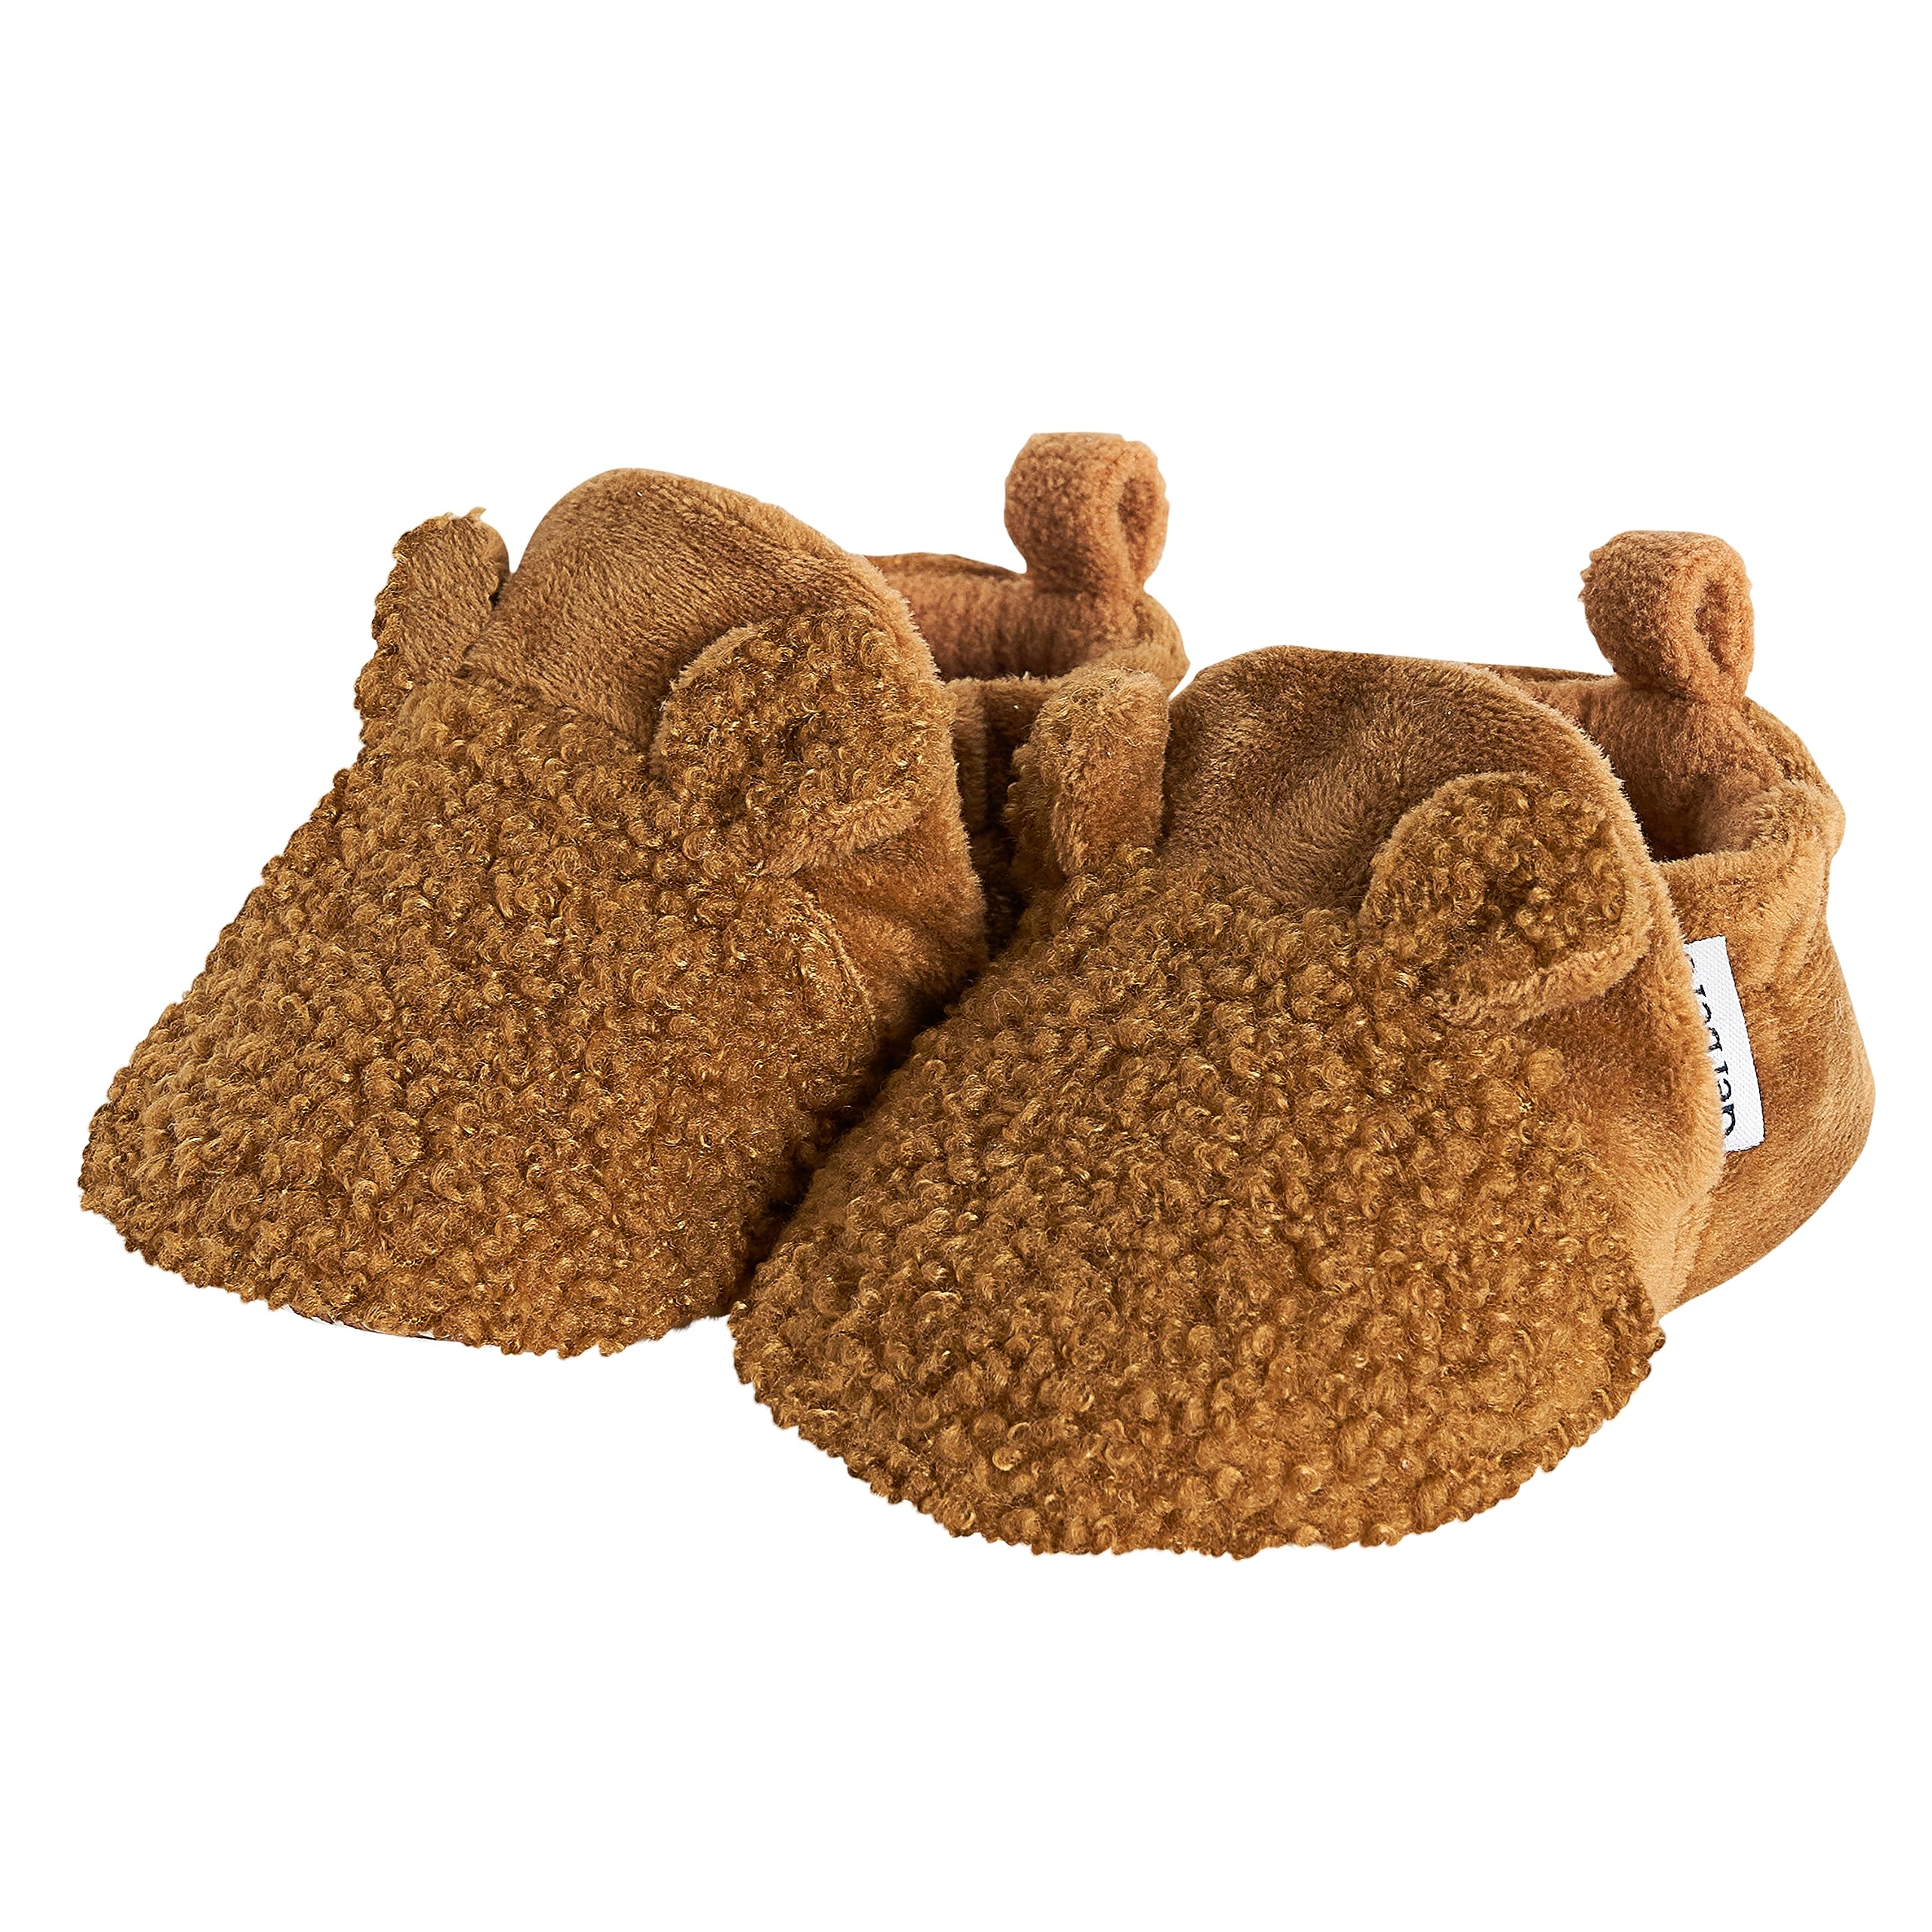 Gerber Unisex-Baby Fleece Lined Non Skid Soft Slipper Booties with Ears